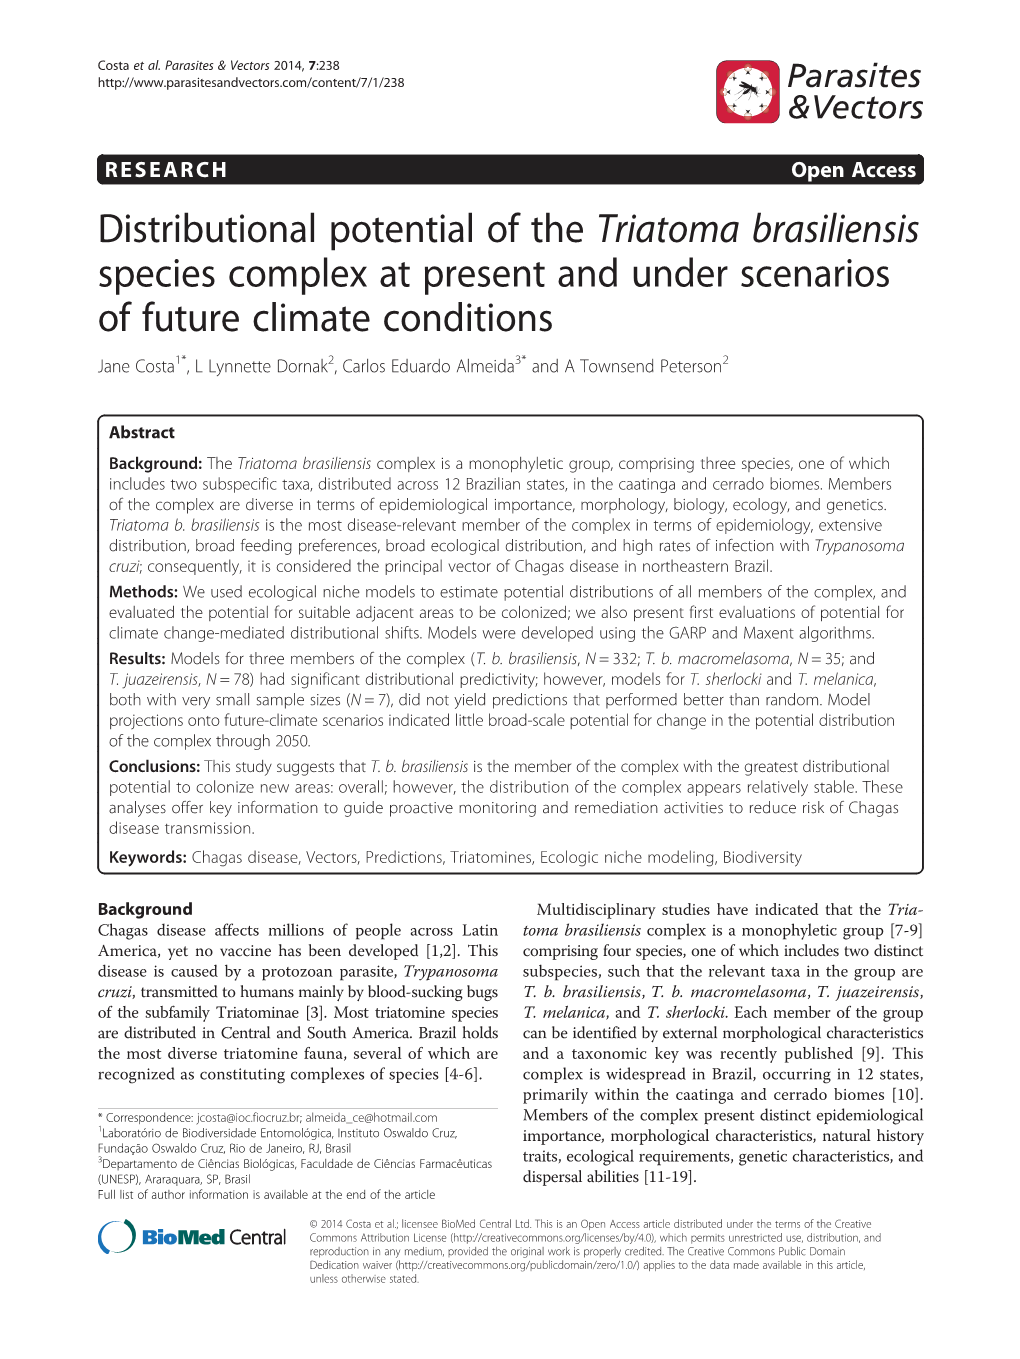 Distributional Potential of the Triatoma Brasiliensis Species Complex at Present and Under Scenarios of Future Climate Condition